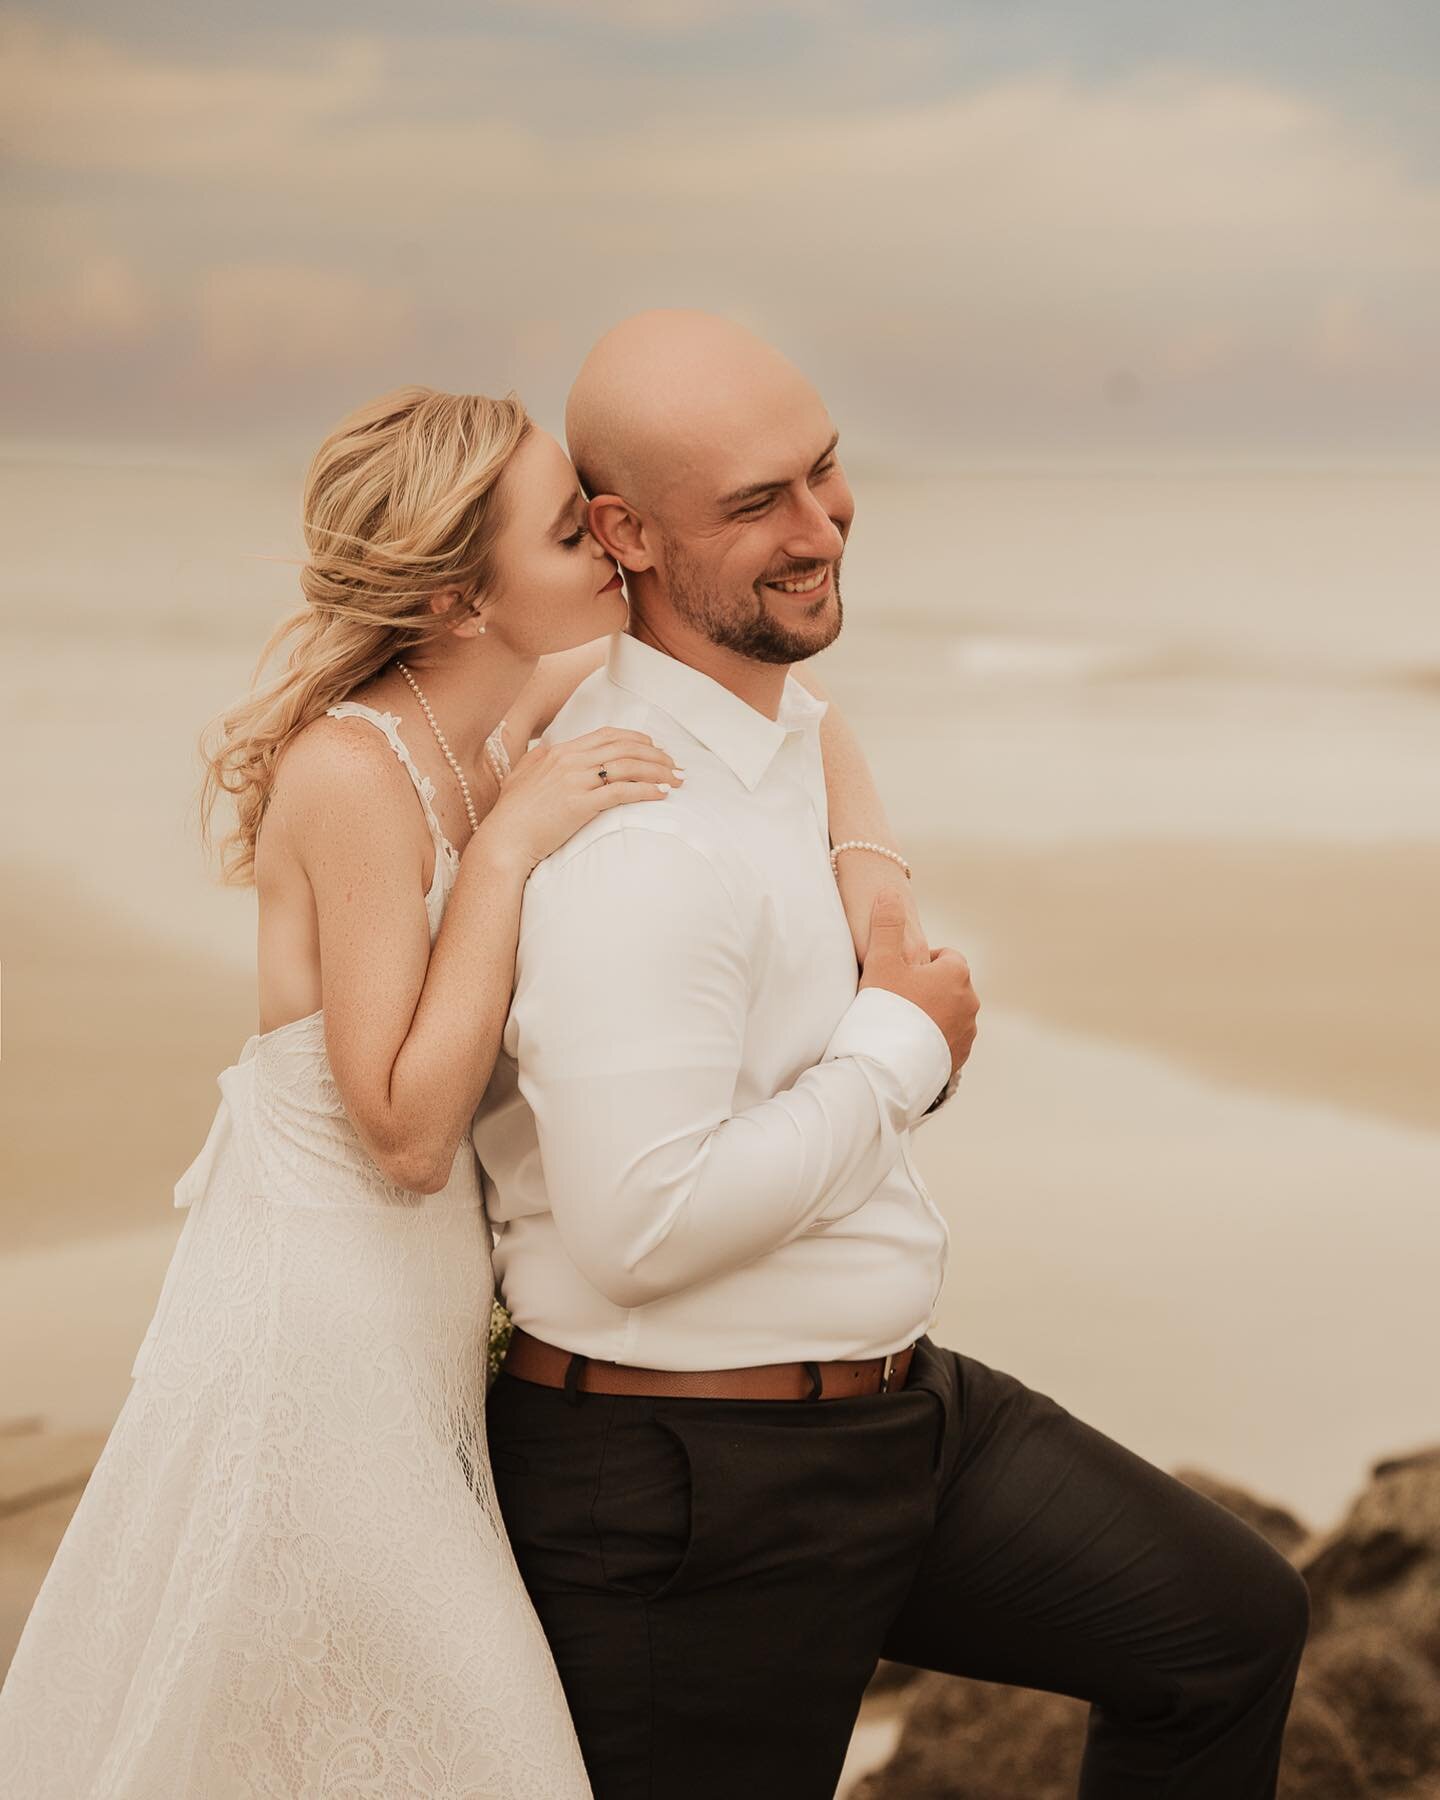 And we'll build this love from the #ground up Now 'til forever it's all of me, all of you, Just take my hand...... 

Tyler + Courtney = A Forever Love 

#savannahelopementphotographer #tybeeisland #destinationphotographer #instaweddings #yourweddingy